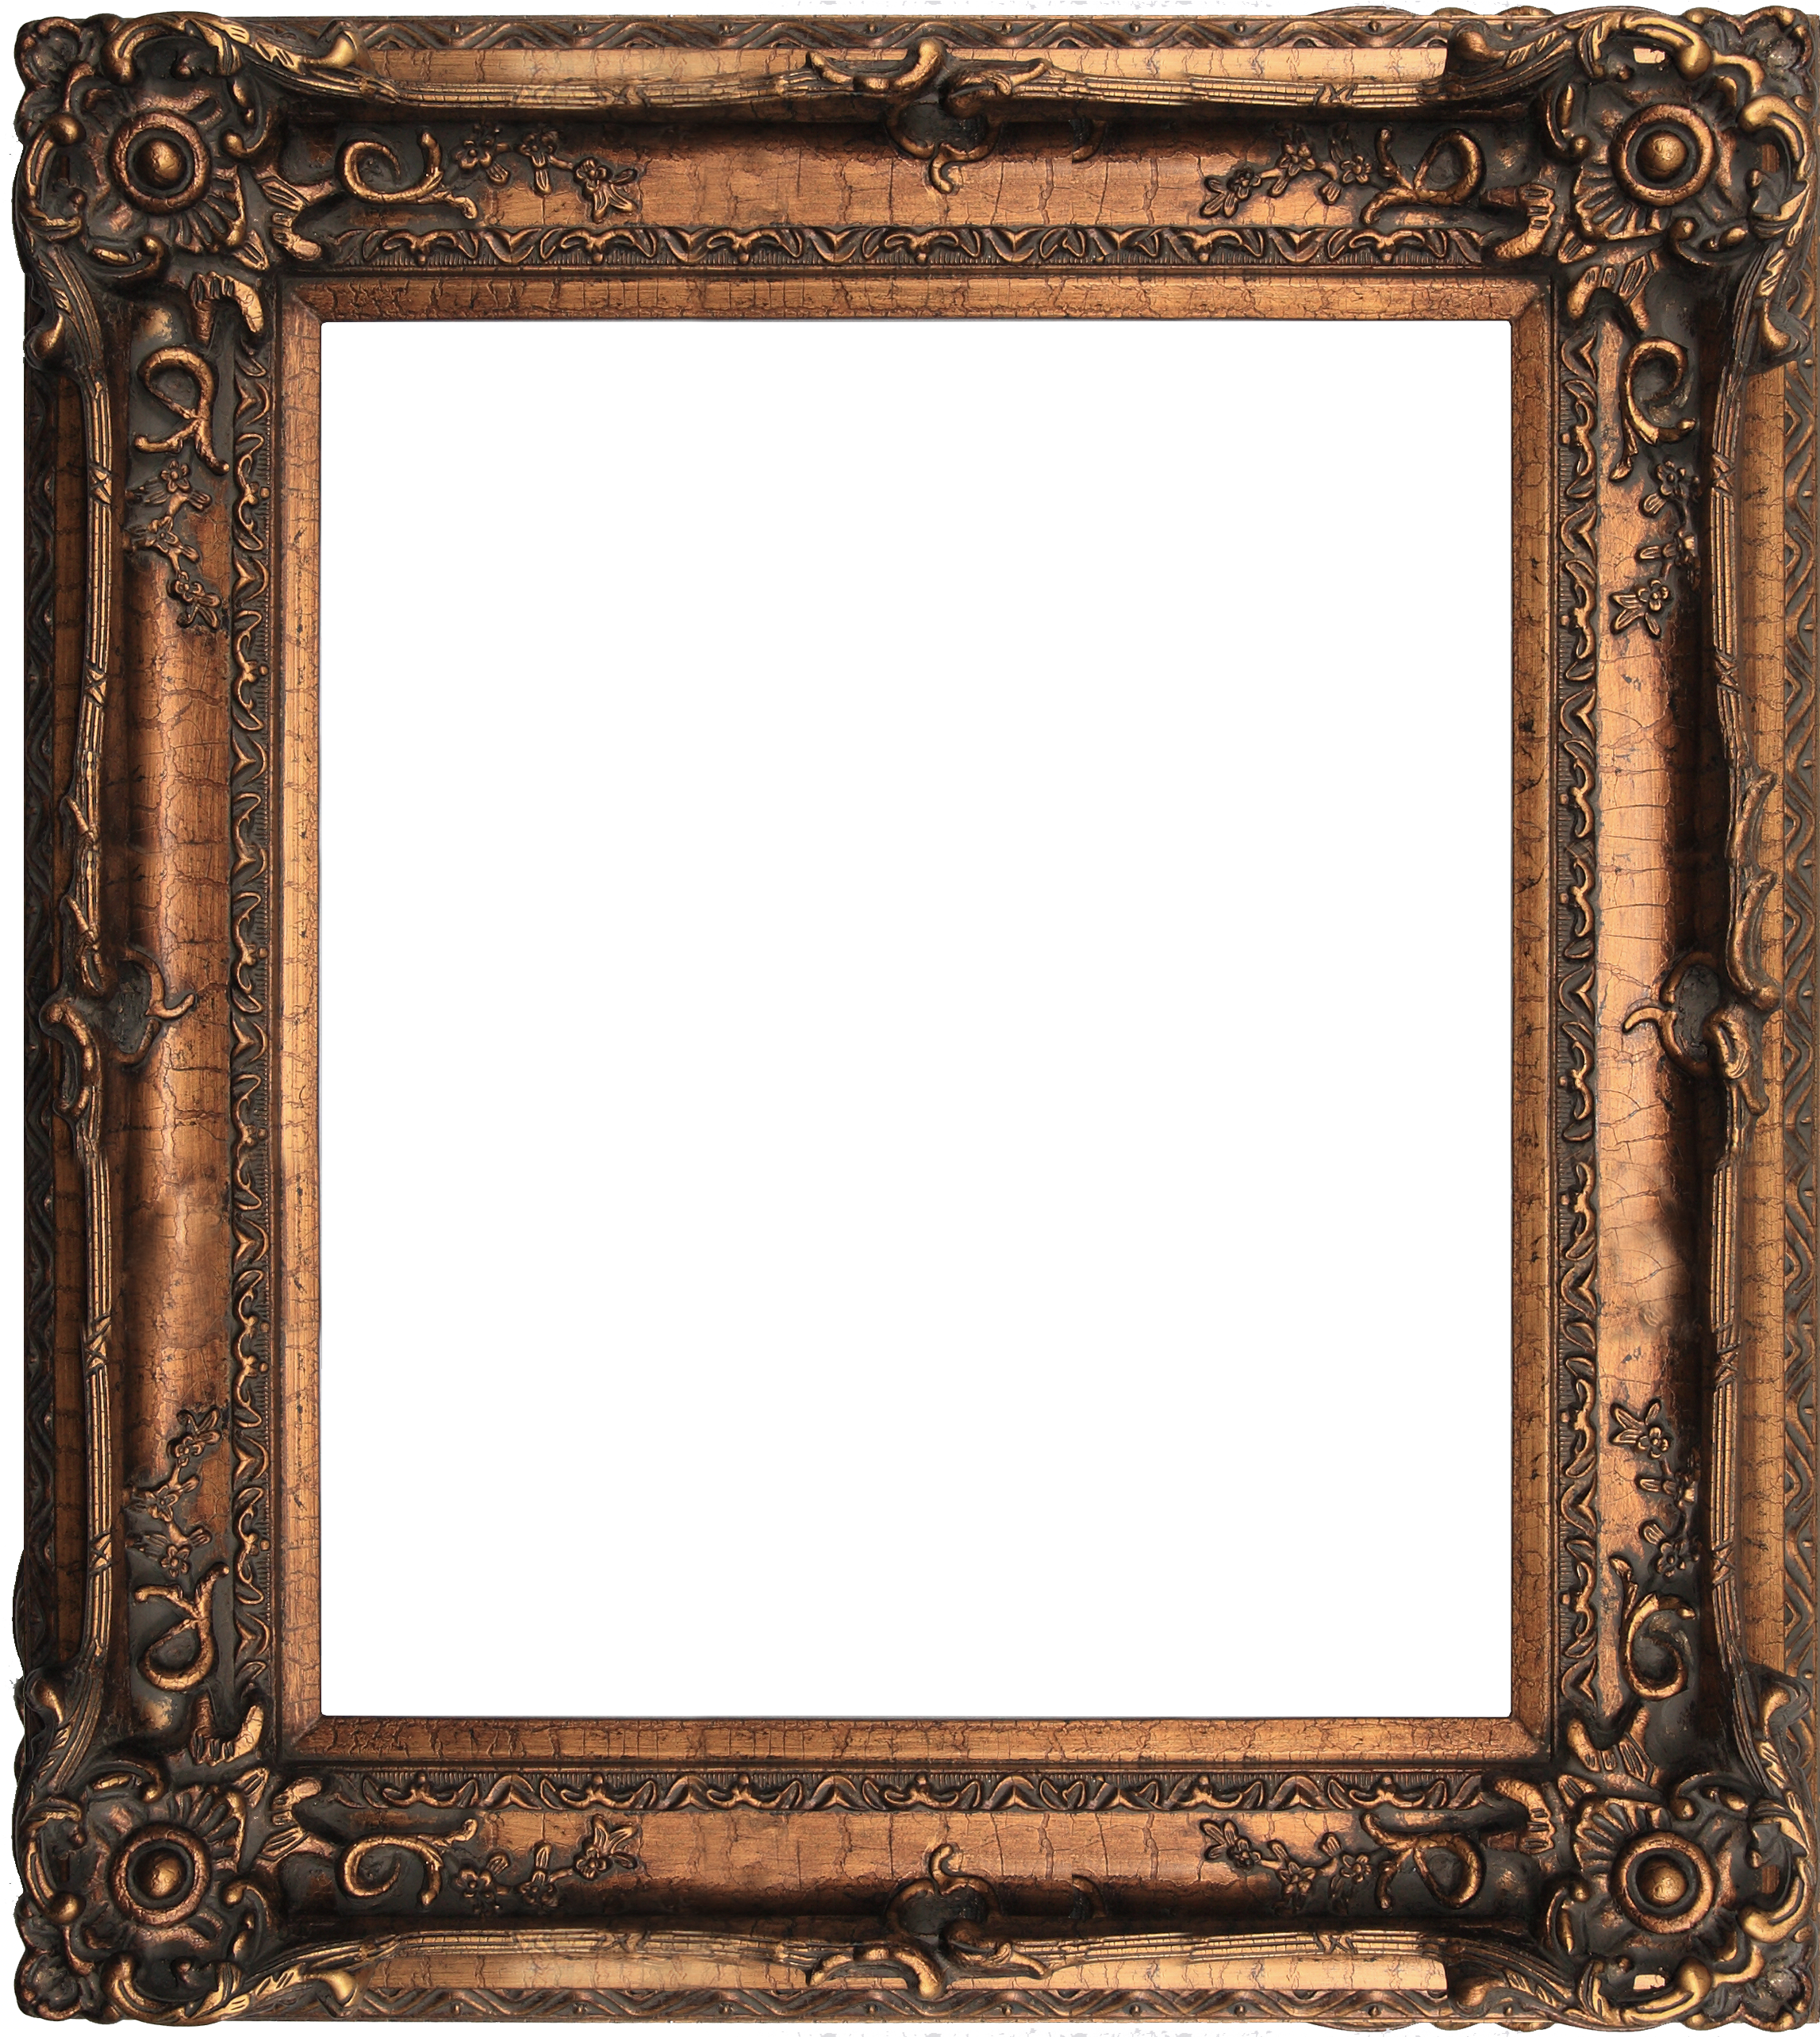 A Picture Frame With A Black Background